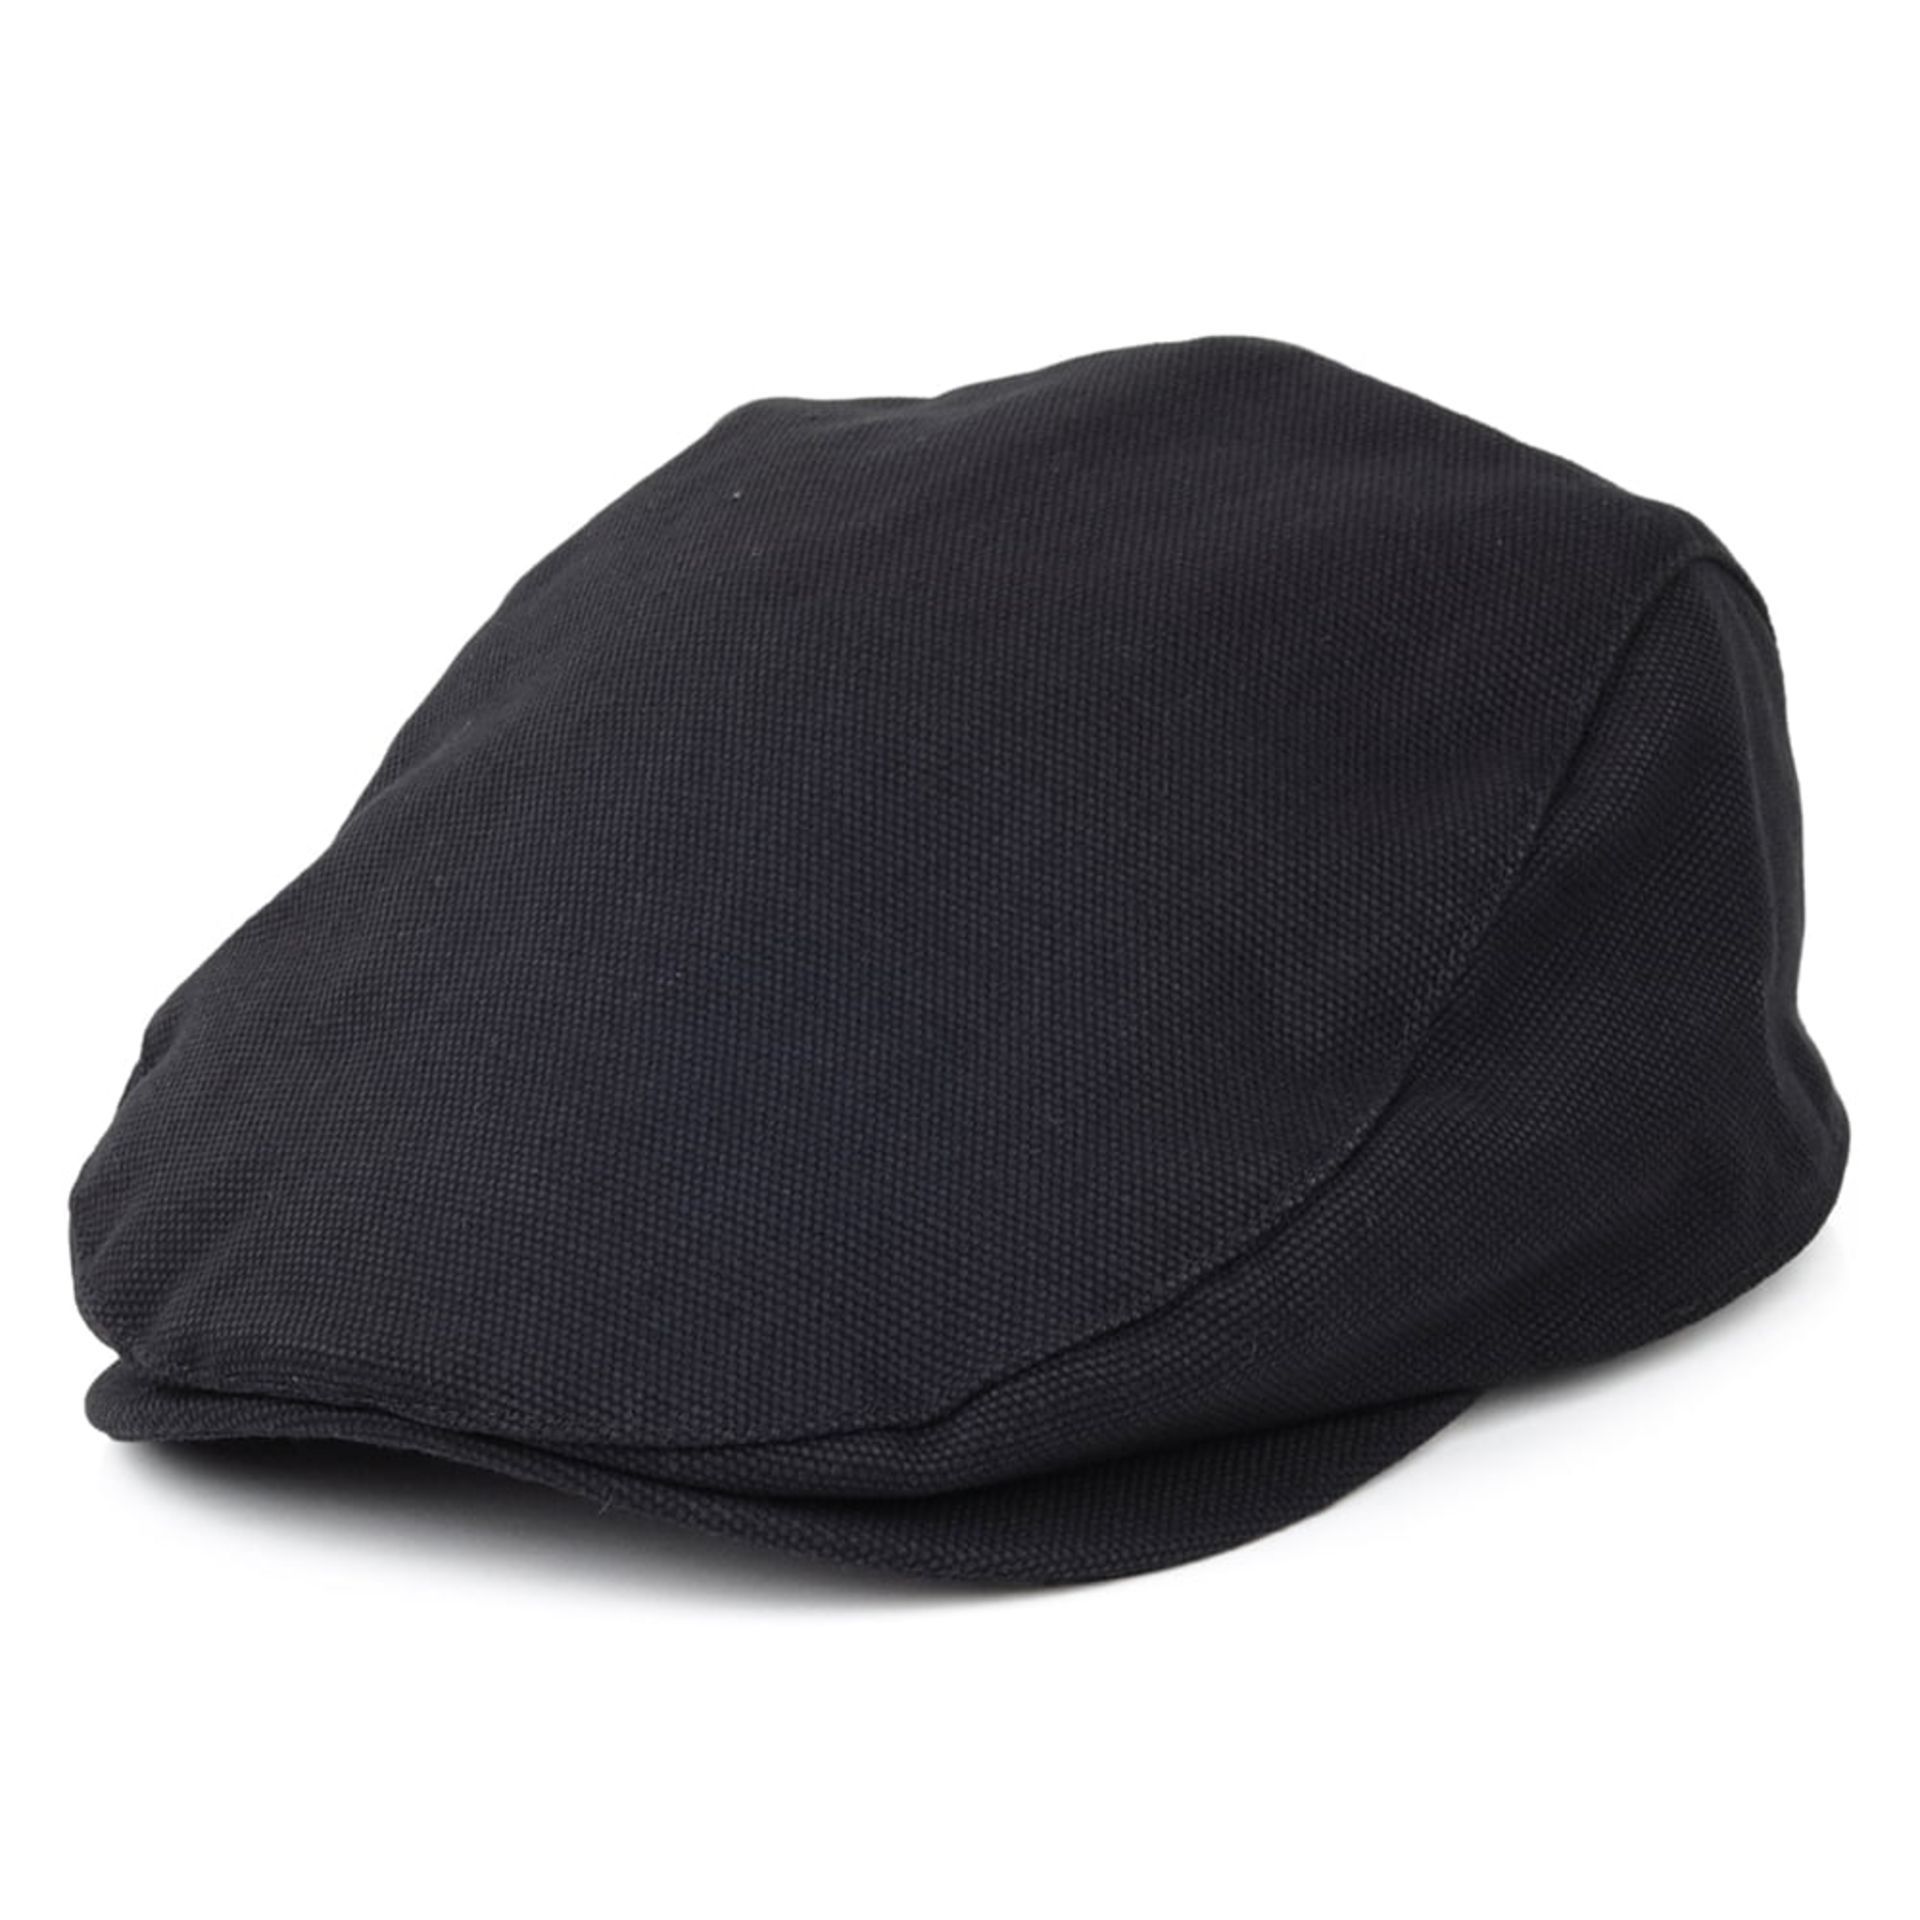 BRAND NEW BARBOUR NAVY CONTIN FLAT CAP SIZE LARGE RRP £35 -3